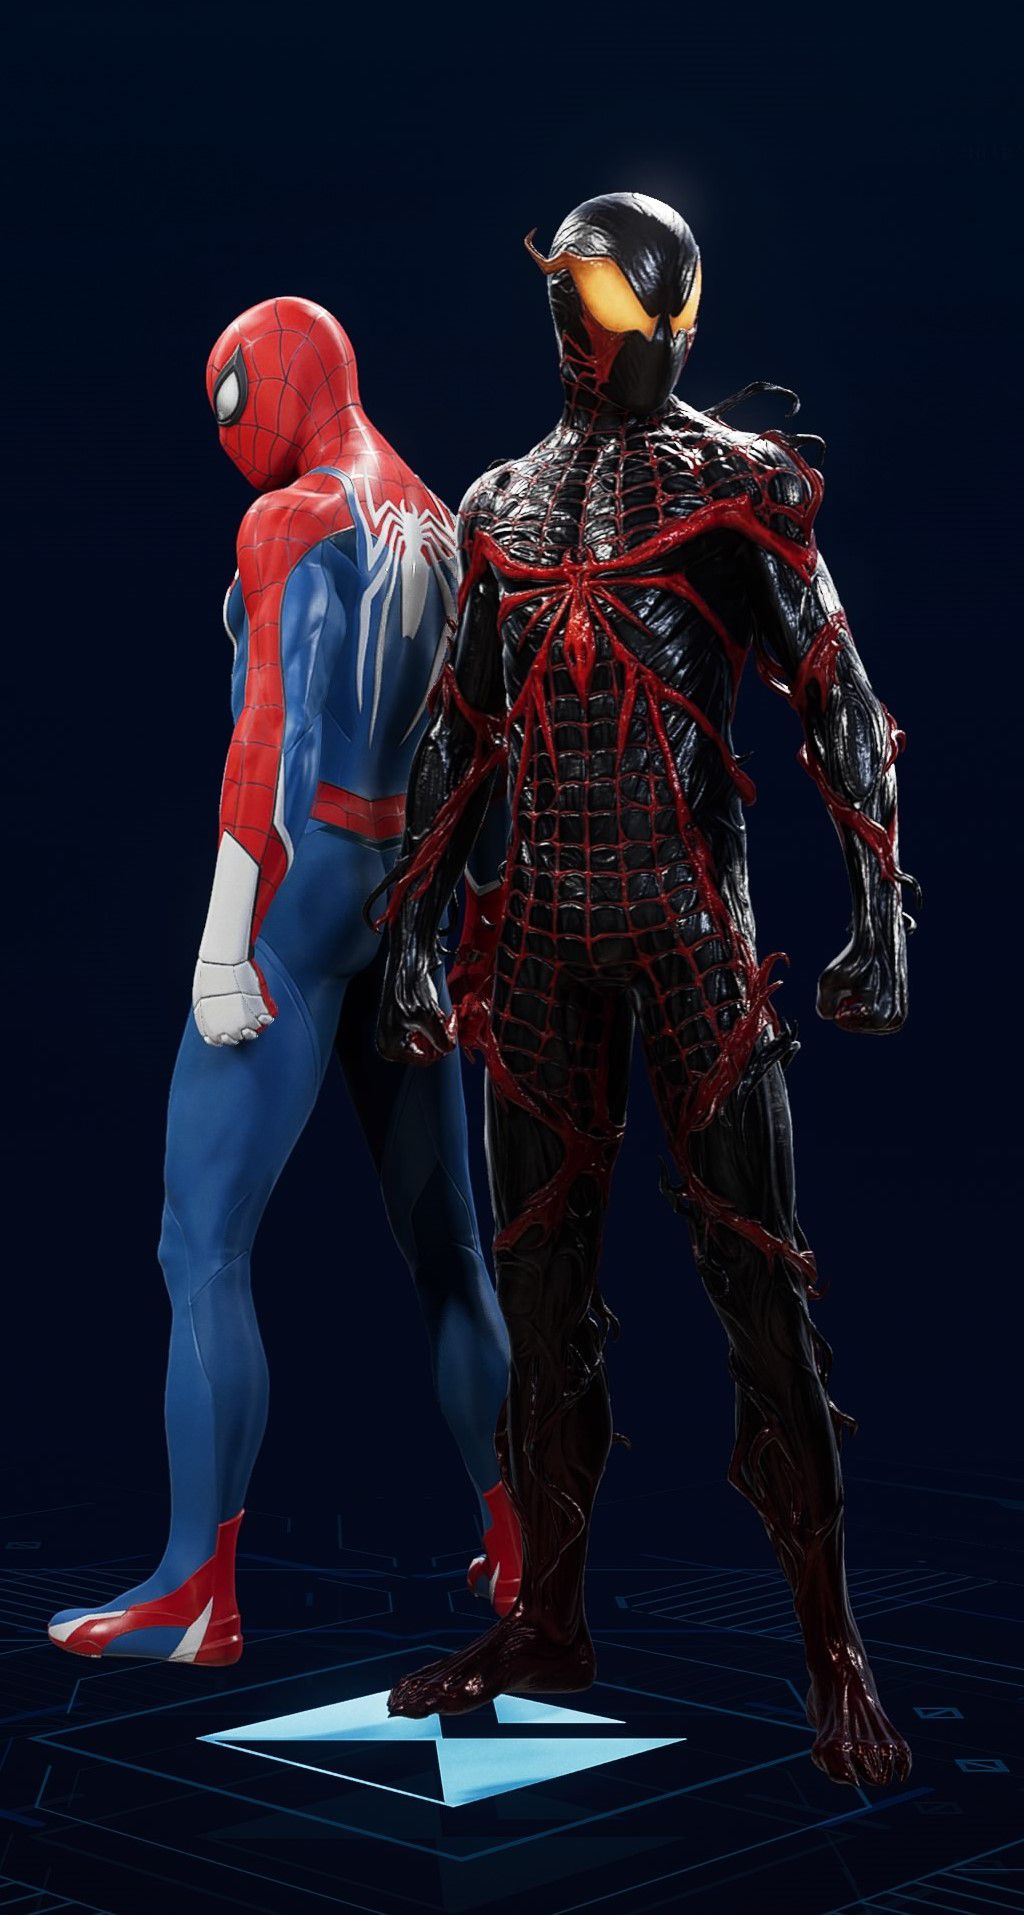 Miles Morales stands in his Absolute Carnage Suit in the suit selection screen of Spider-Man 2.